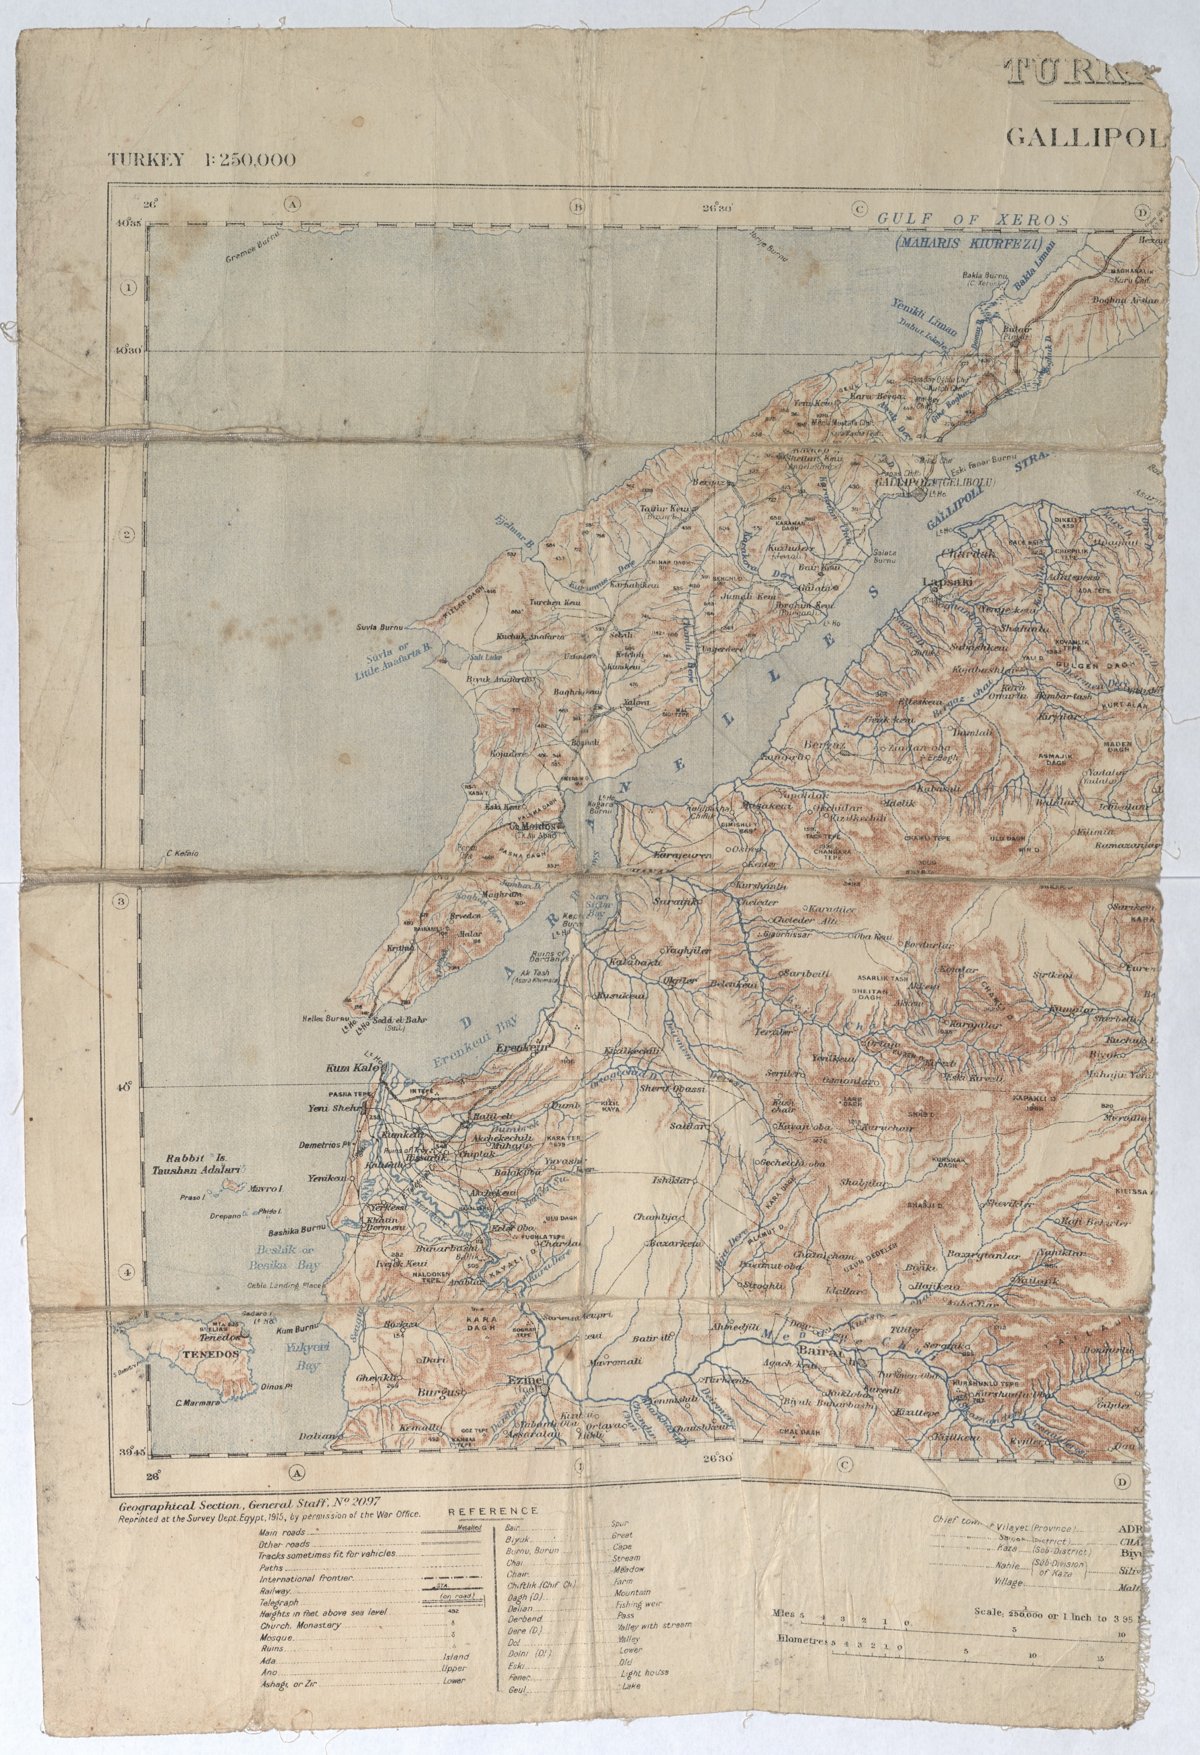 Map torn in half, showing the site of the Gallipoli campaign.